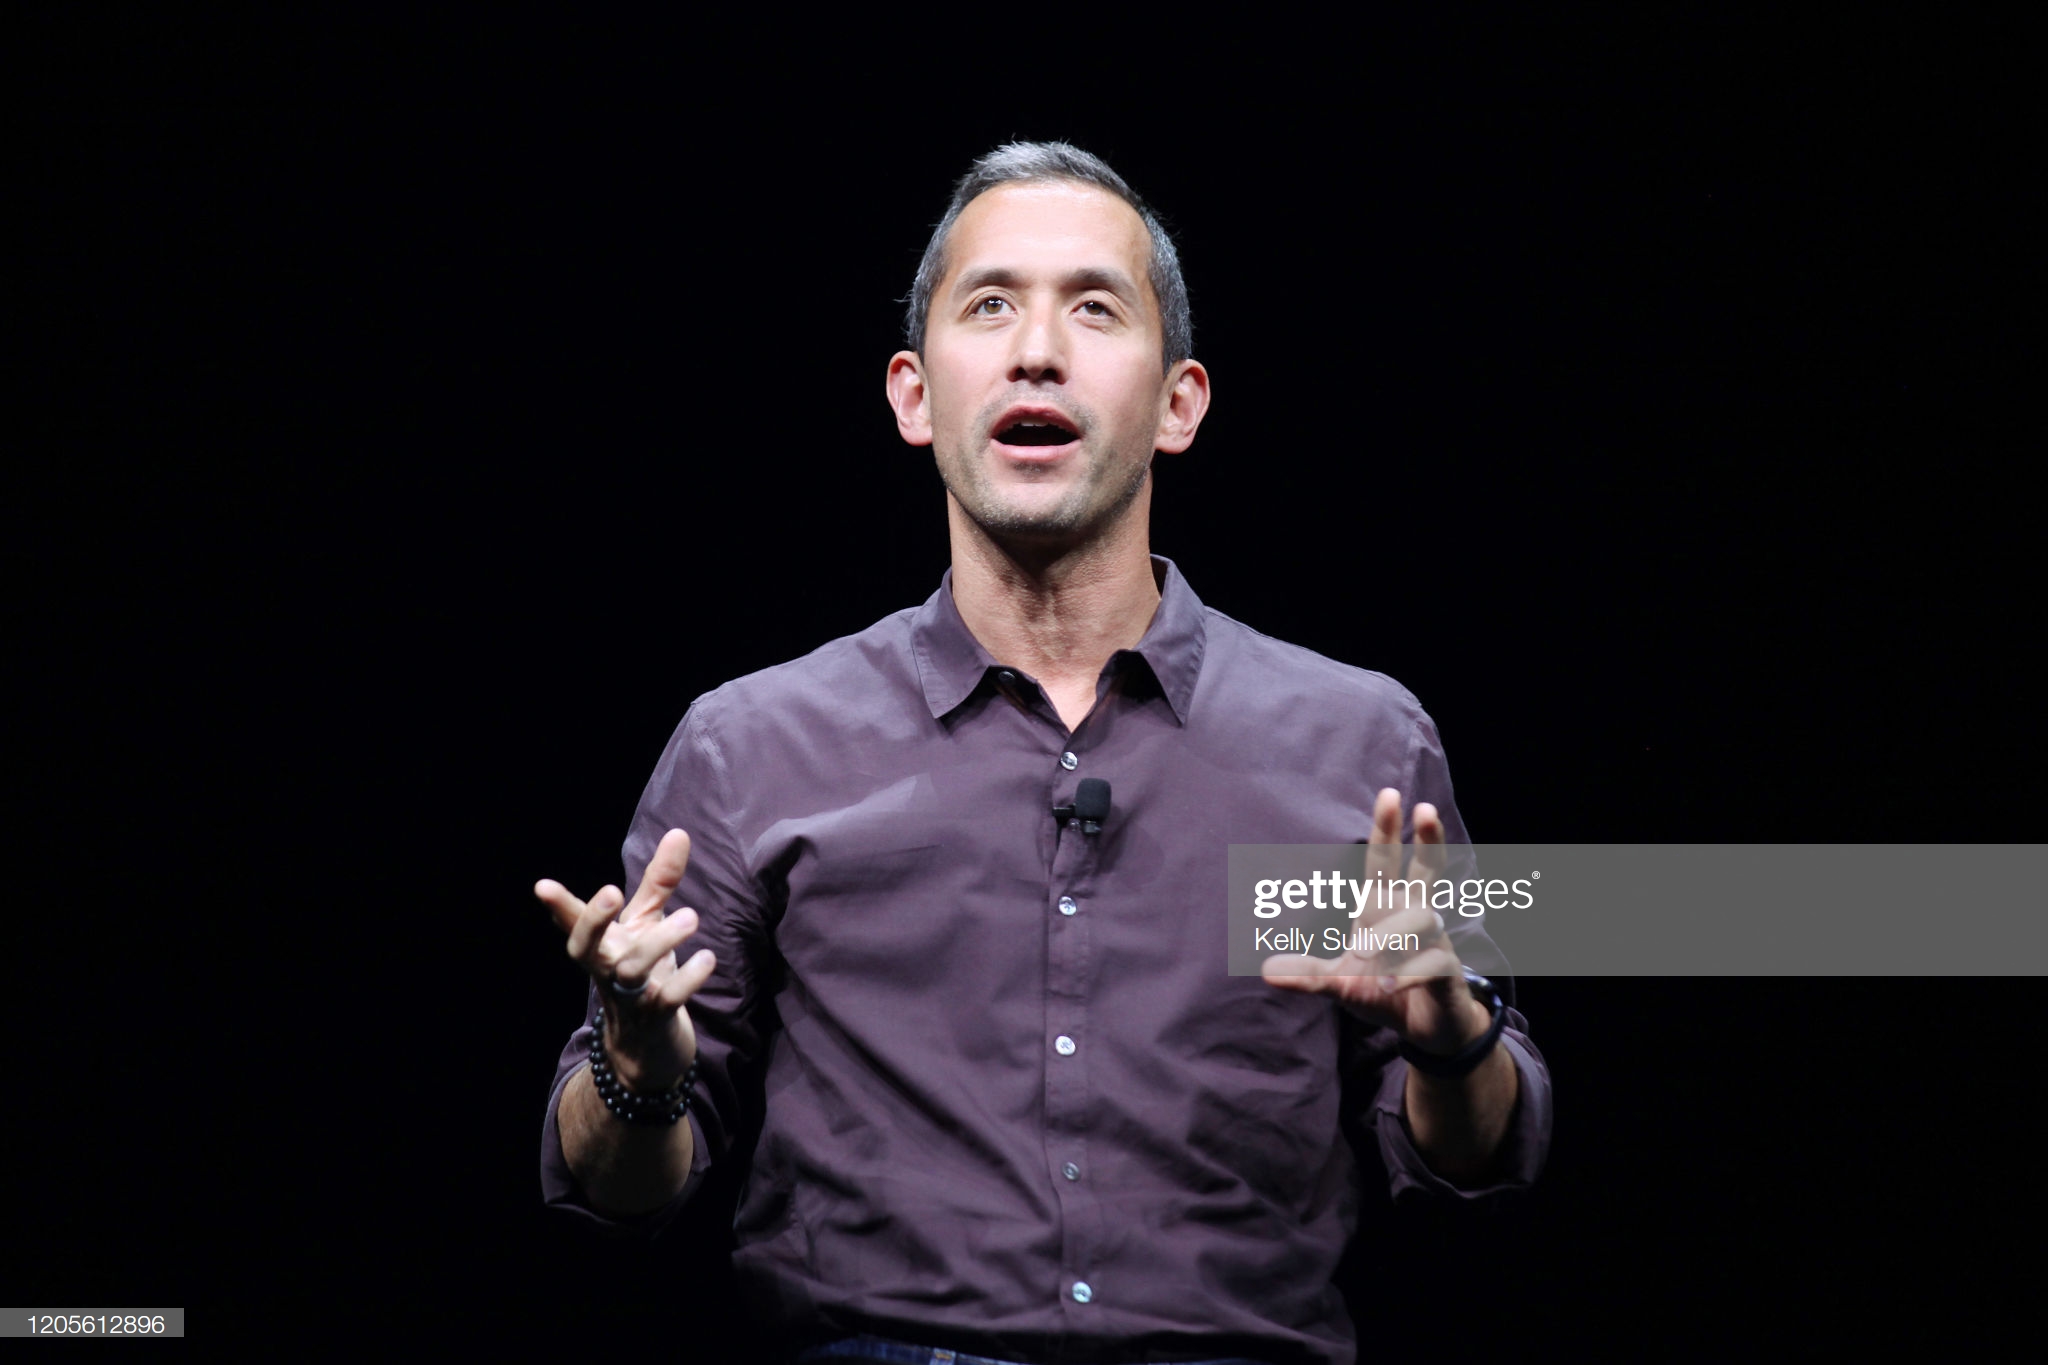 gettyimages-1205612896-2048x2048.jpg